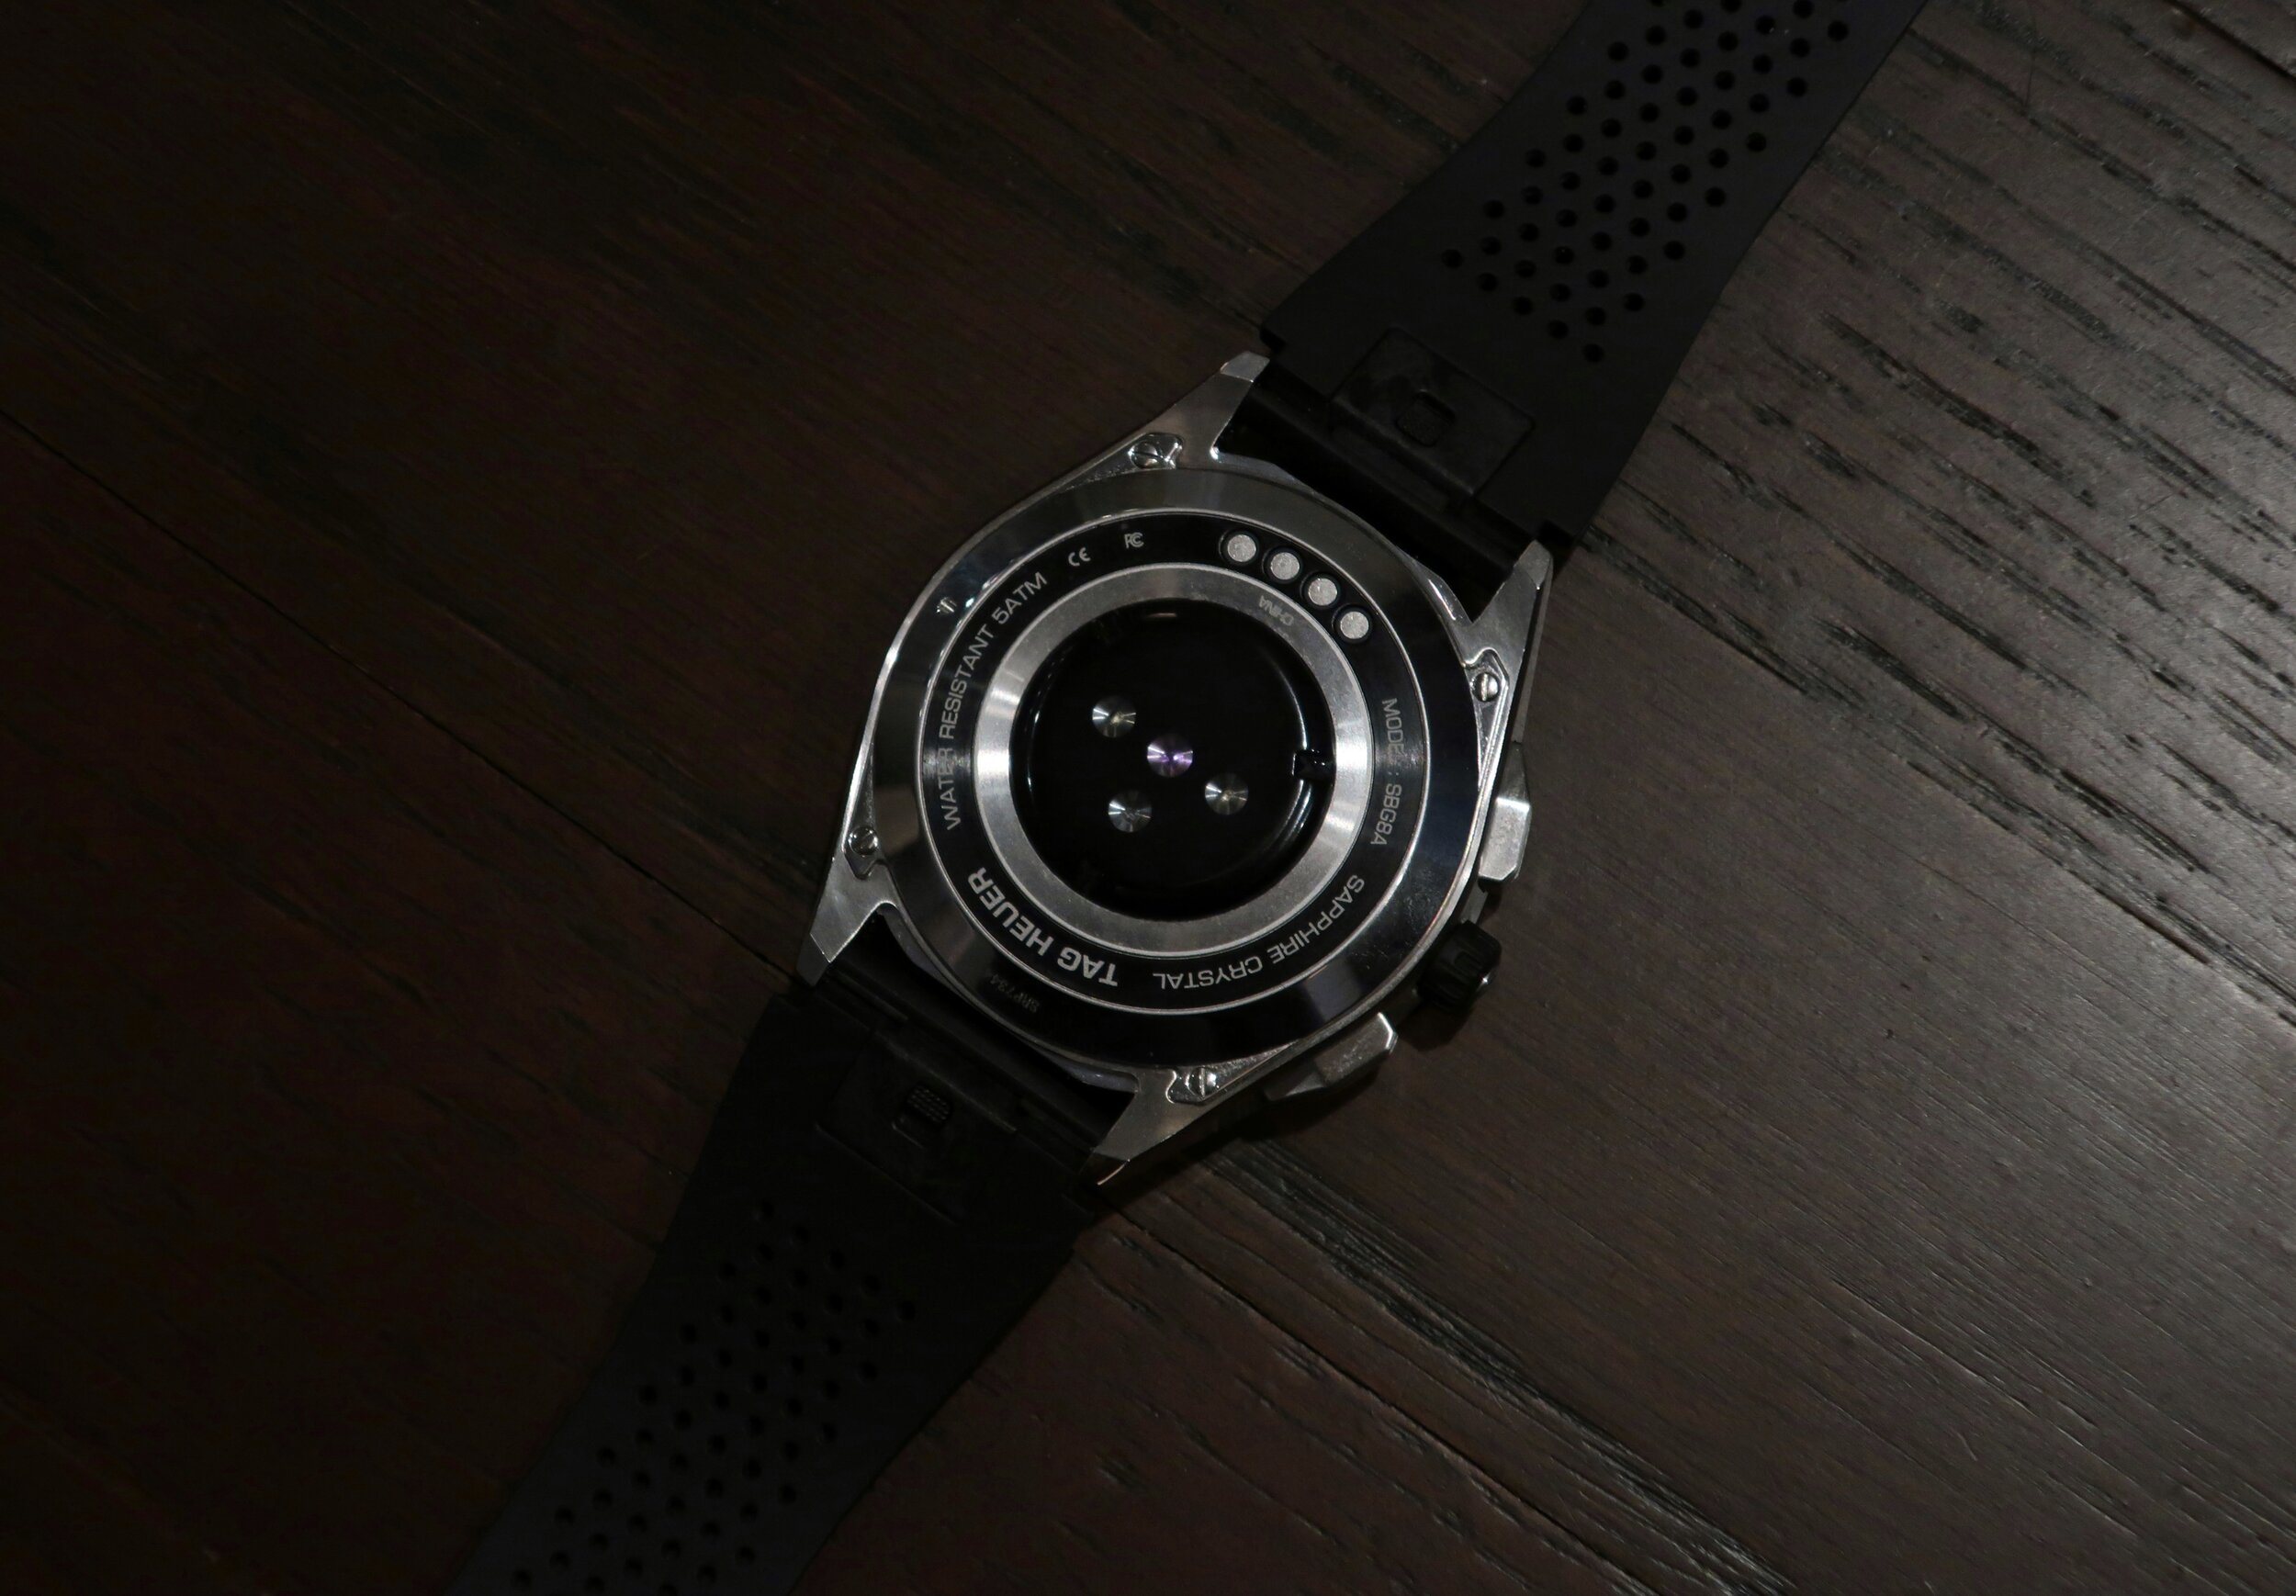 Hands-On Tag Heuer Connected Smartwatch Review — Wrist Enthusiast